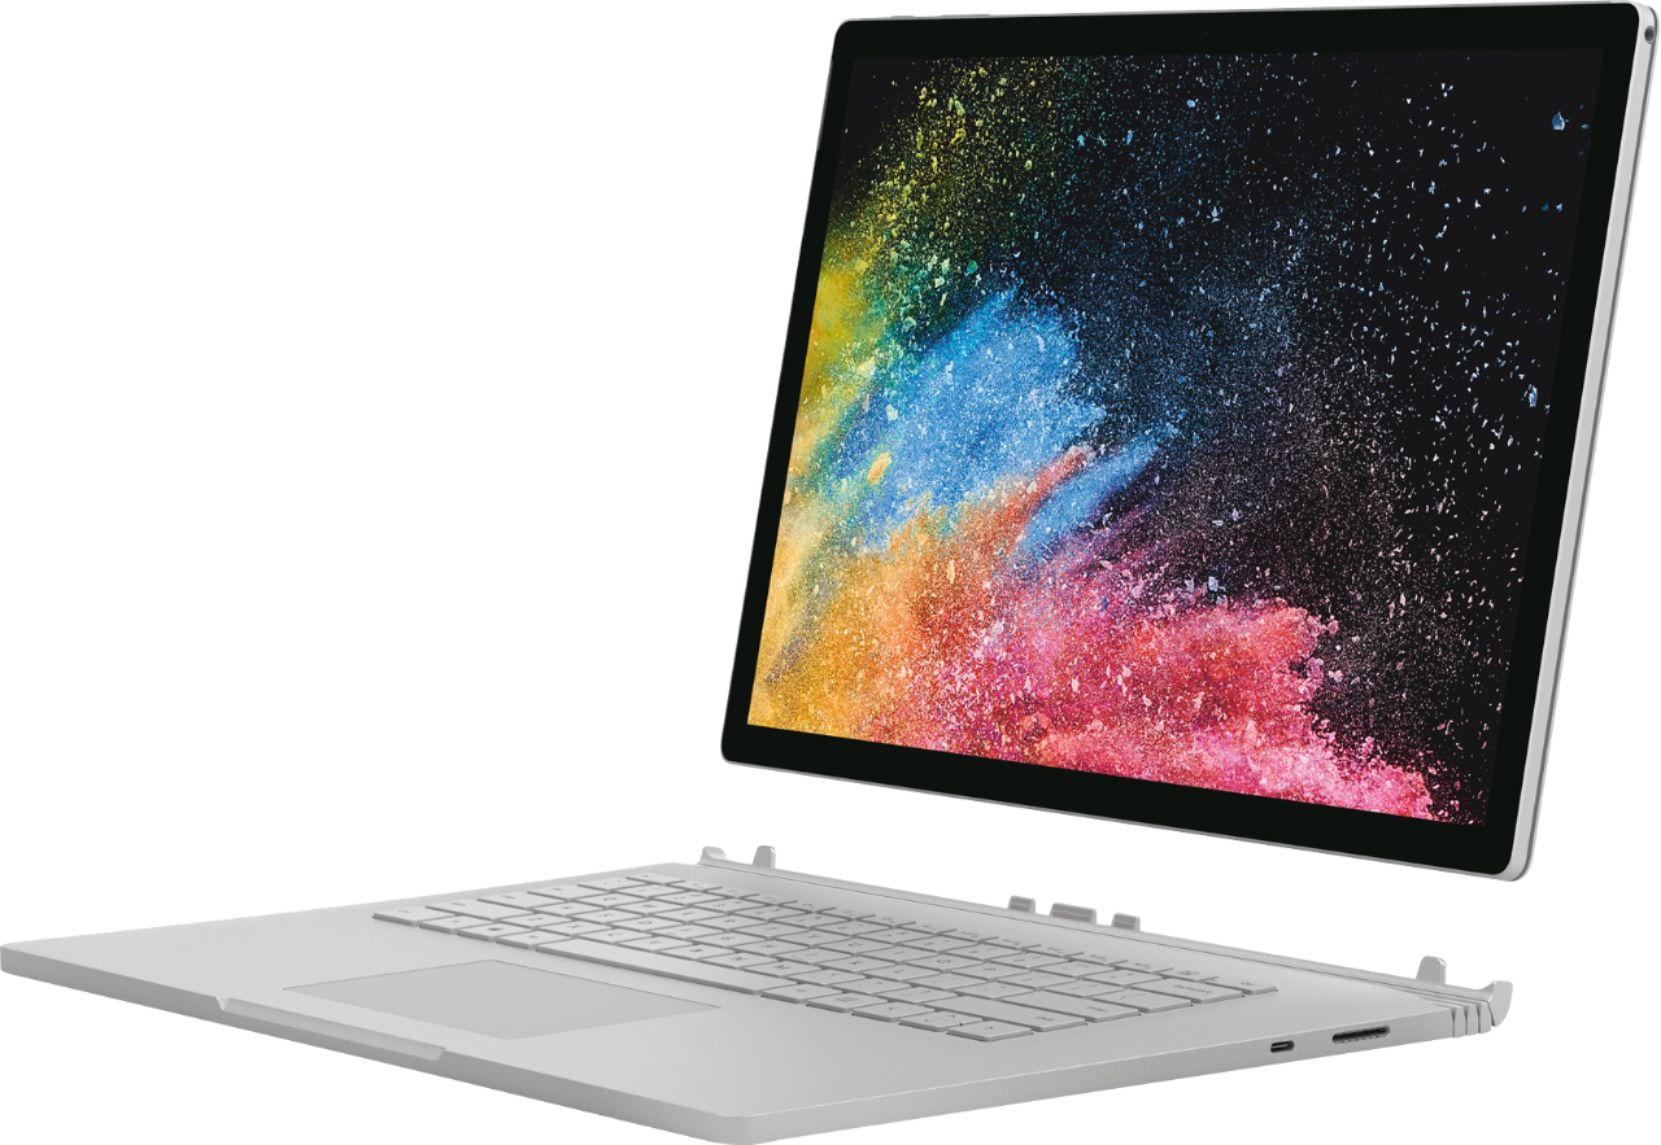 Angle View: Microsoft - Geek Squad Certified Refurbished Surface Book 2 - 15" Touch-Screen Laptop - Intel Core i7 - 16GB Memory - 512GB SSD - Silver